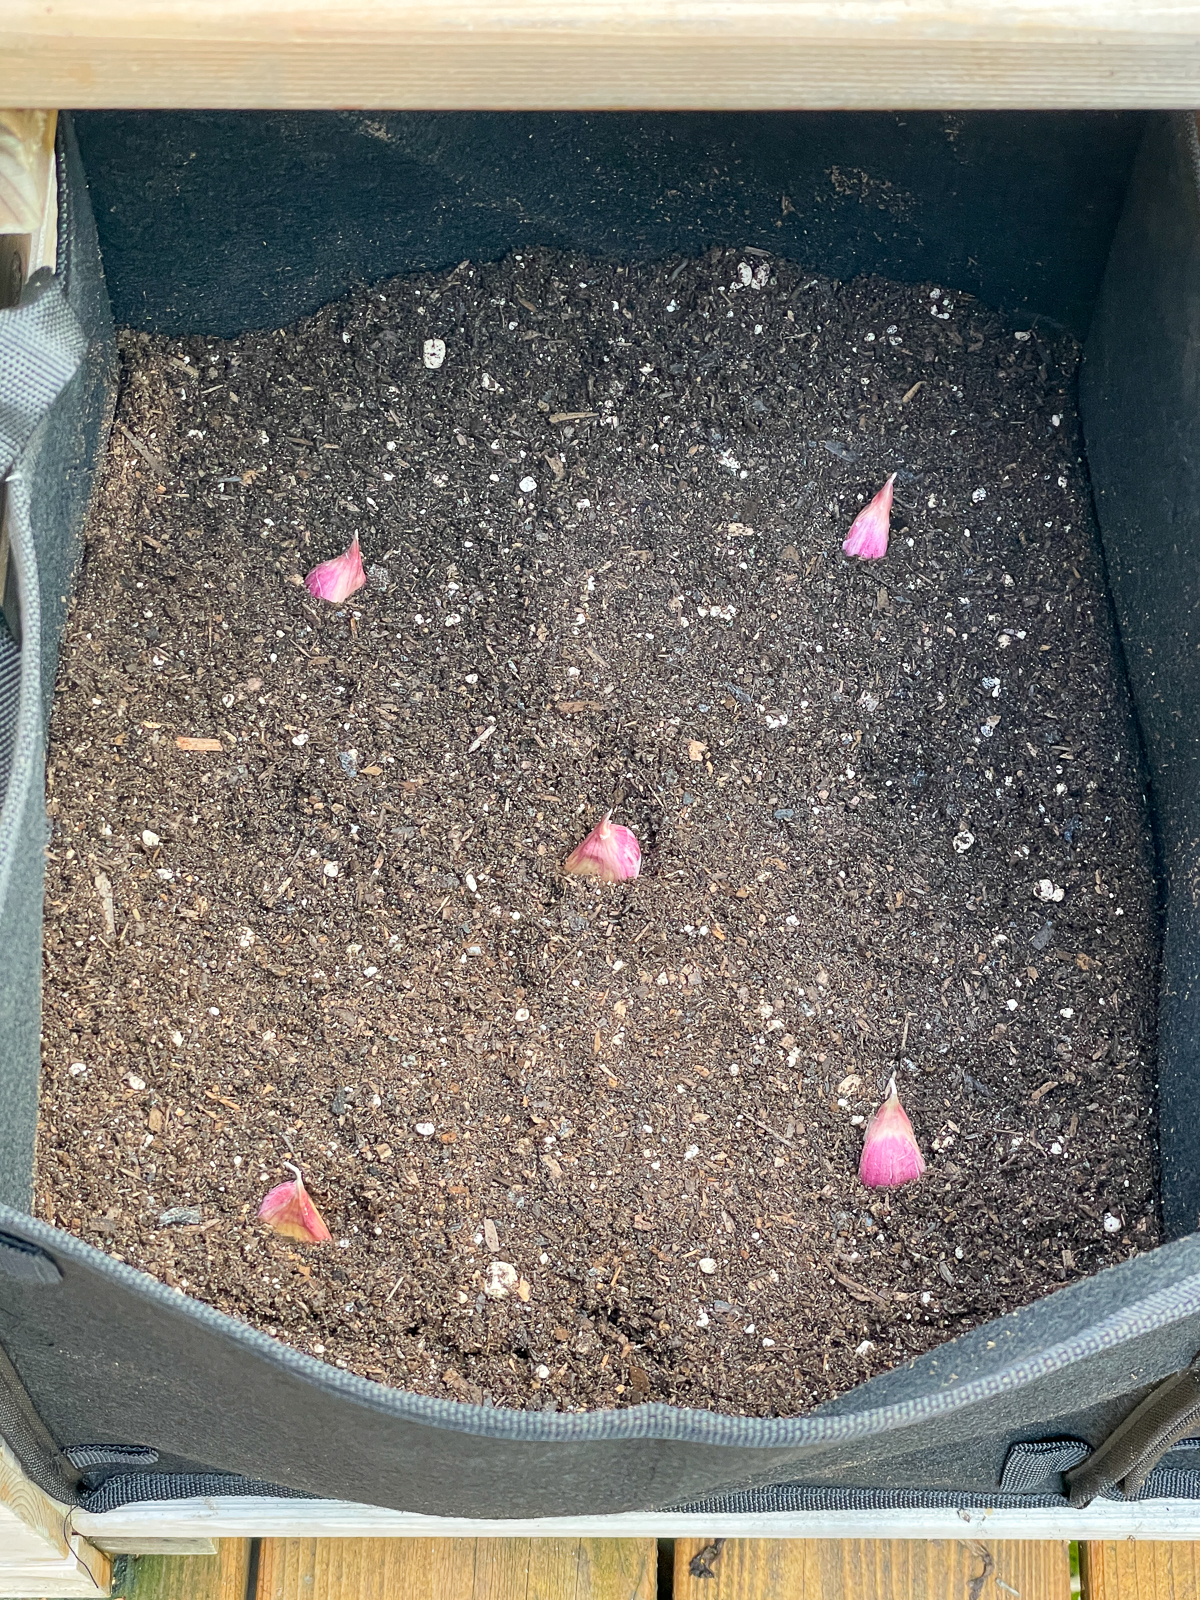 planted cloves of garlic in grow bag